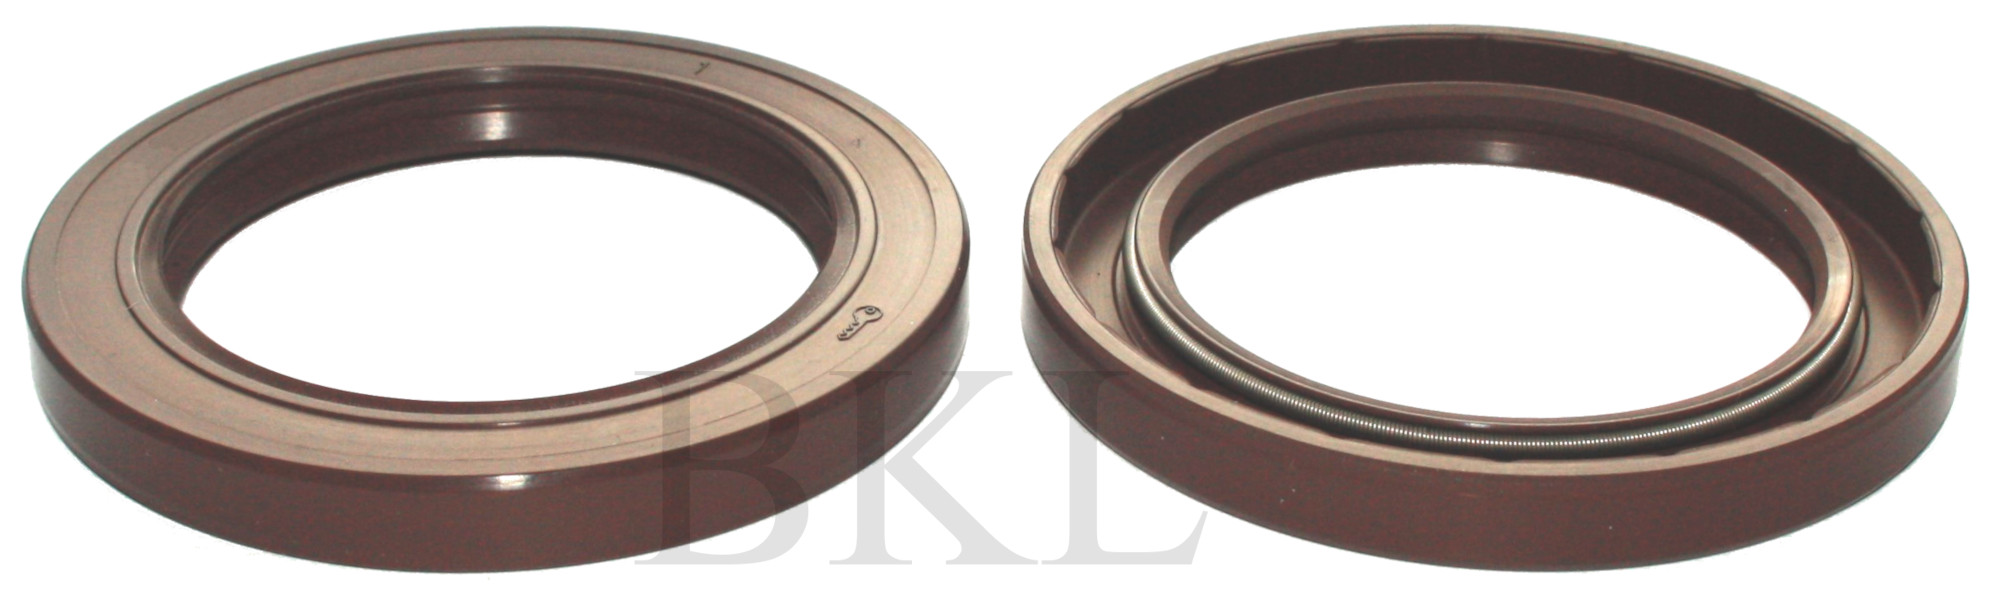 100x120x12mm R23/TC Double Lip Viton Rotary Shaft Oil Seal with Garter Spring image 2